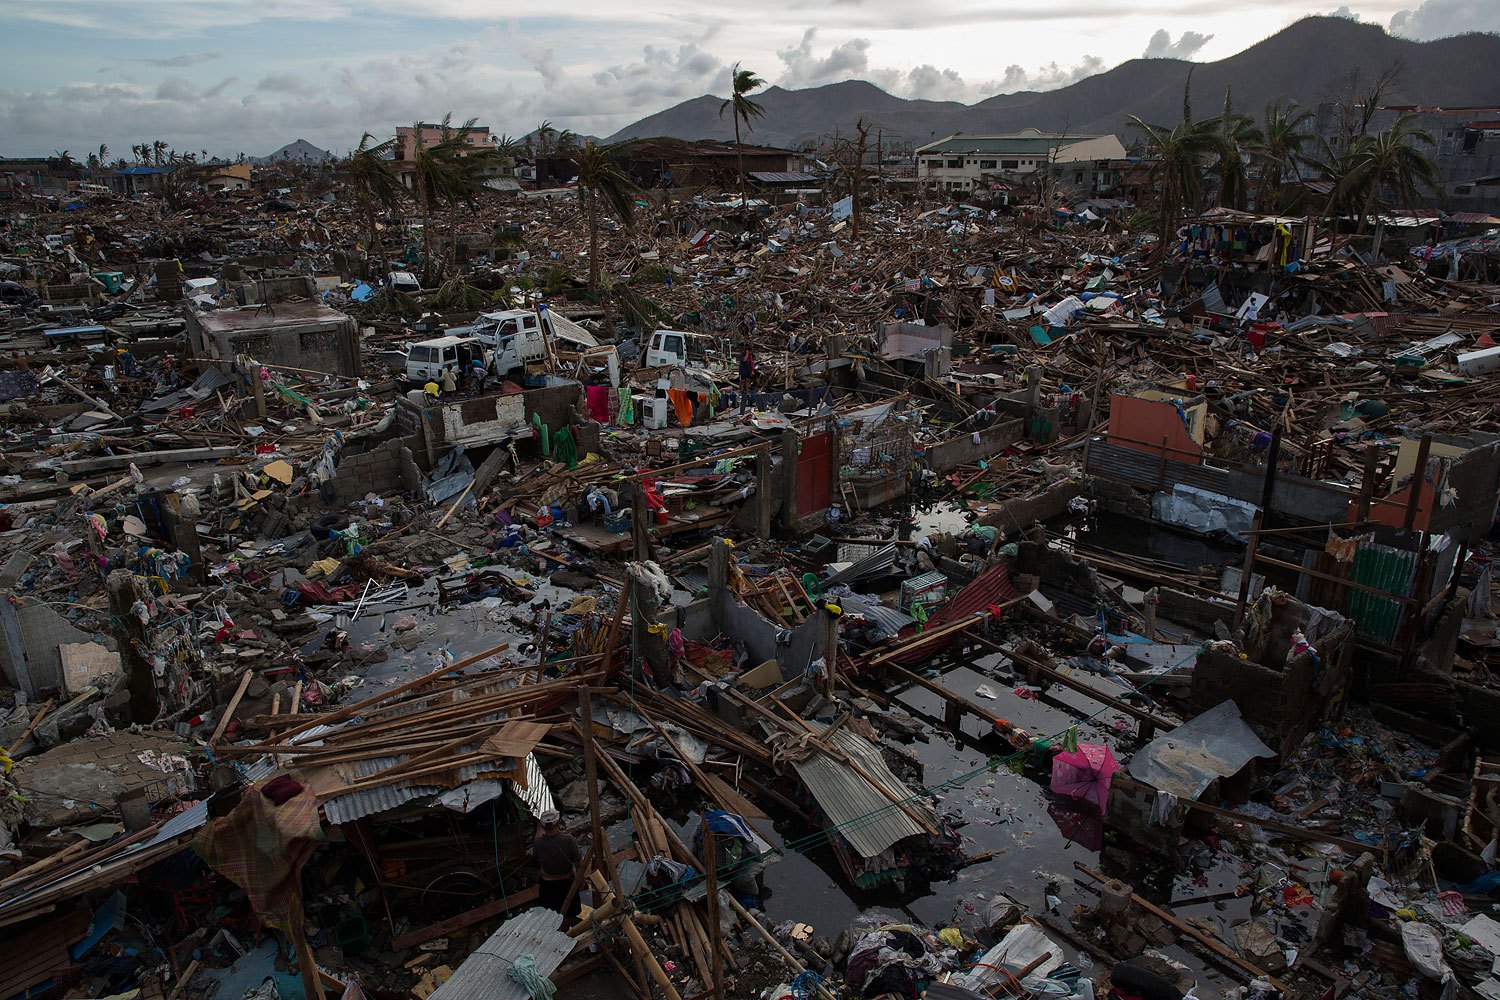 A neighborhood destroyed by Haiyan Typhoon in Tacloban, Philippines on November 13, 2013.